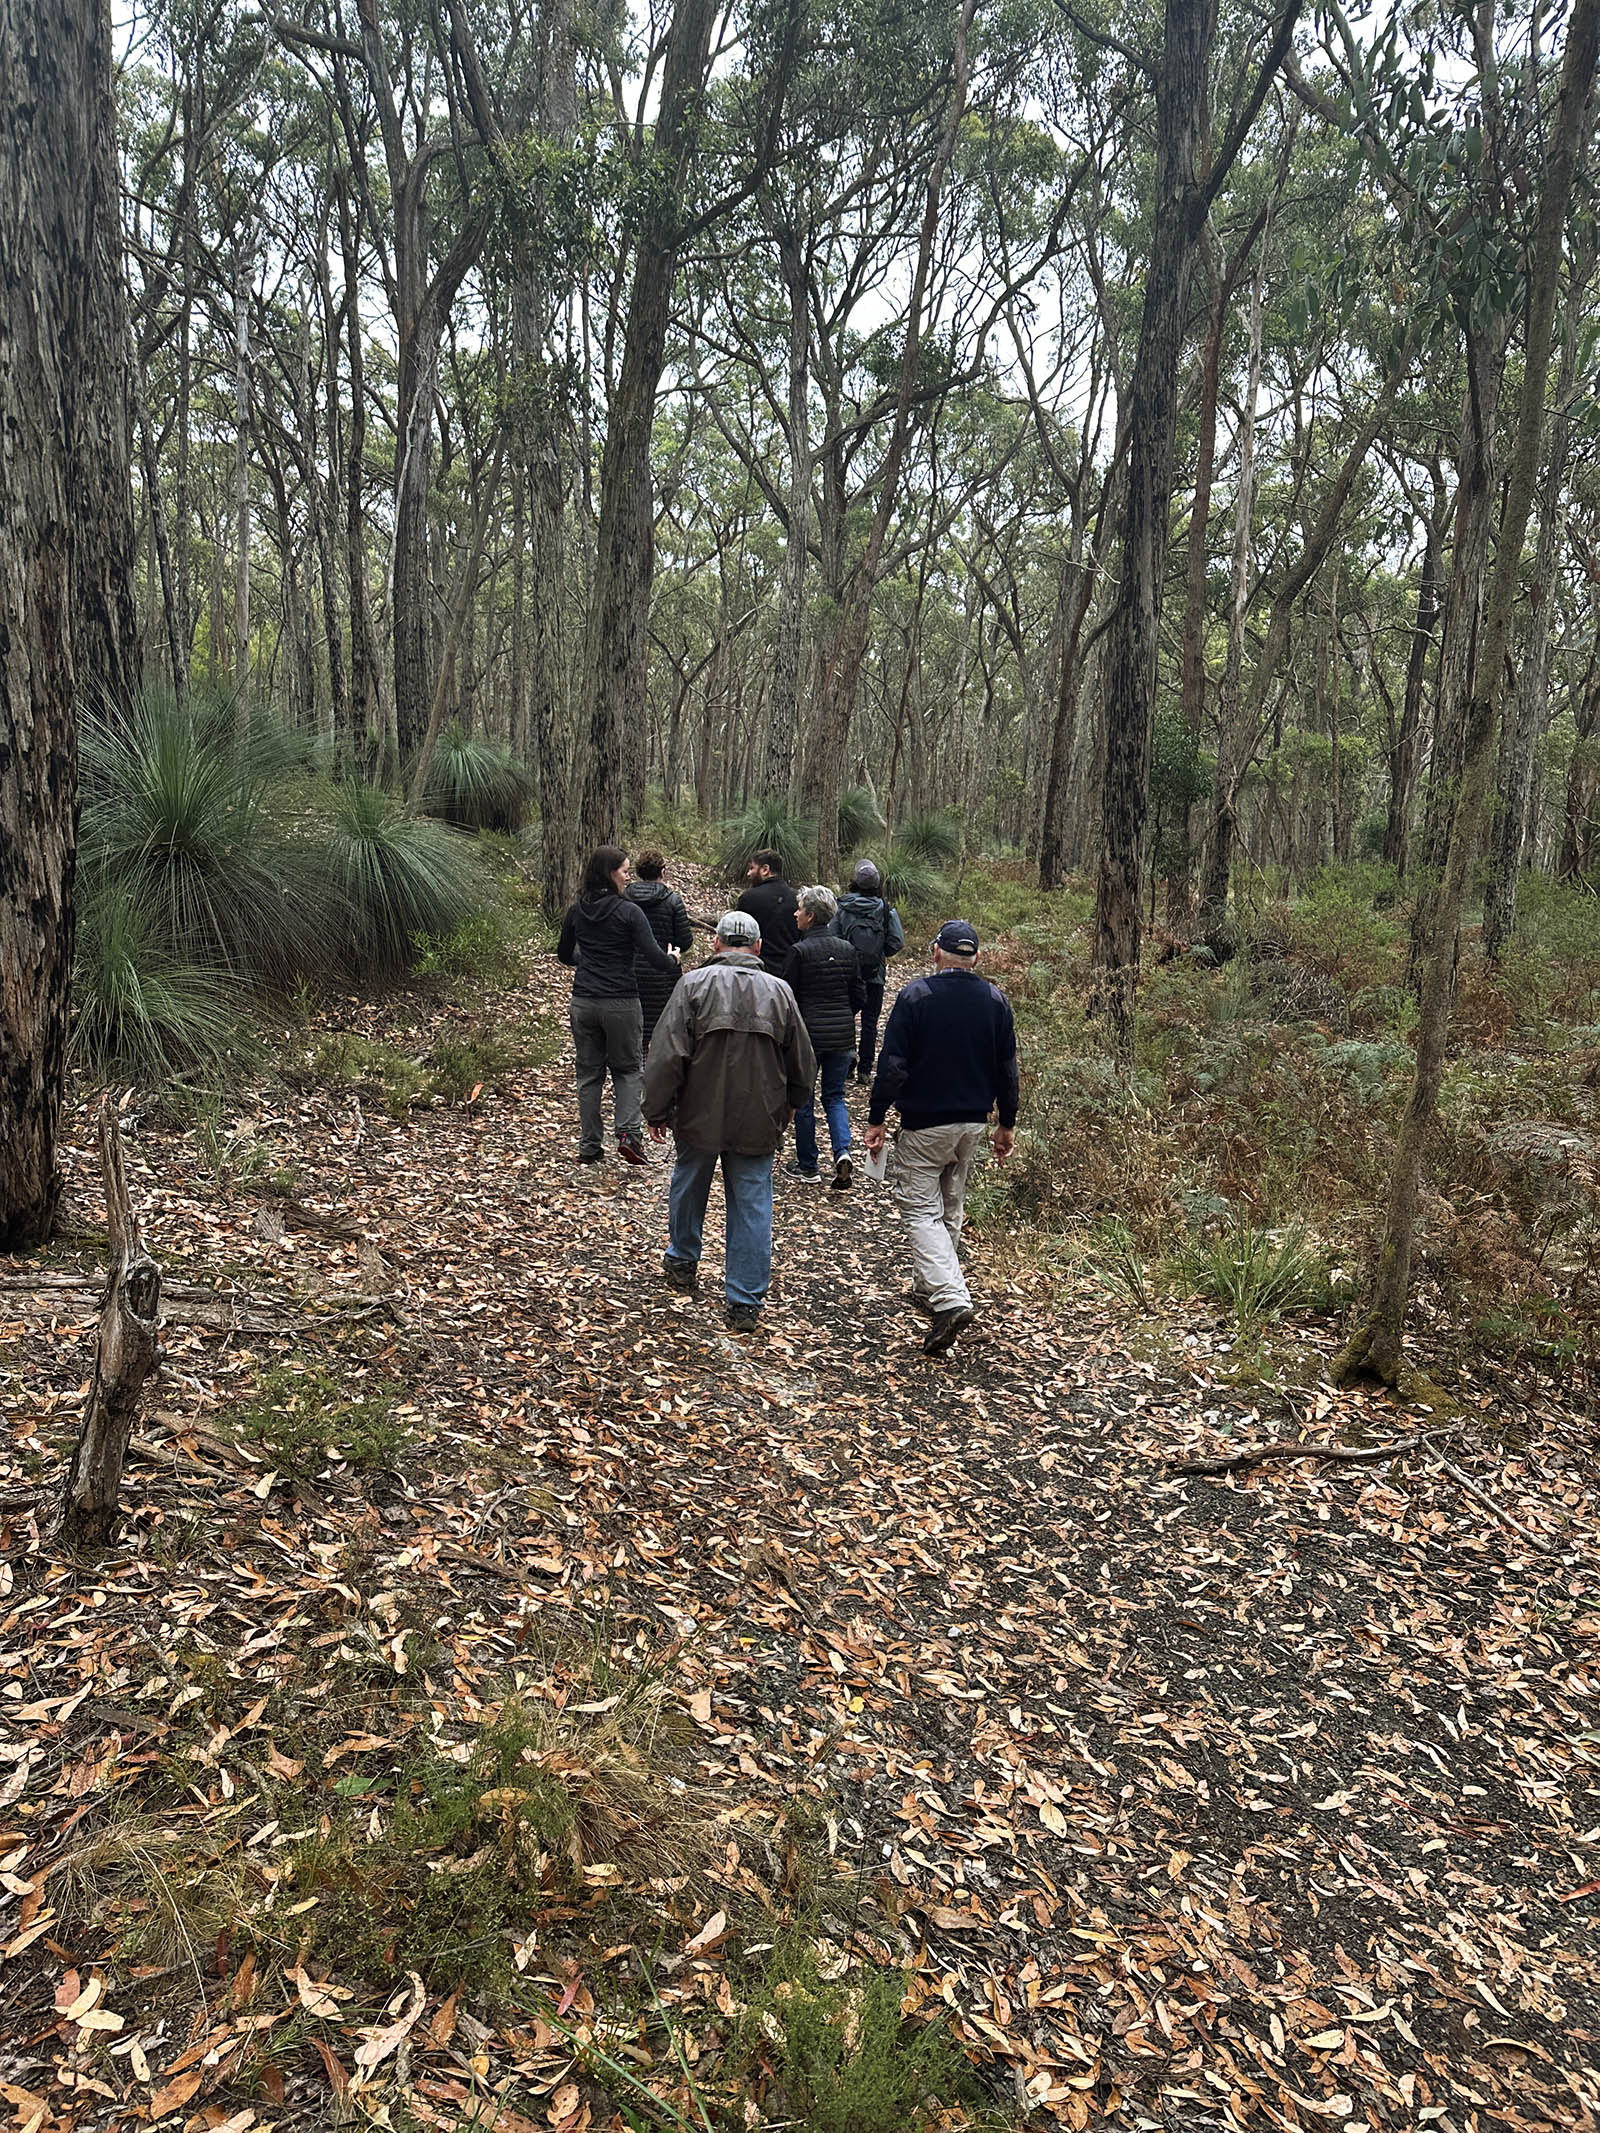 A group of seven people walk on a path through a forested region